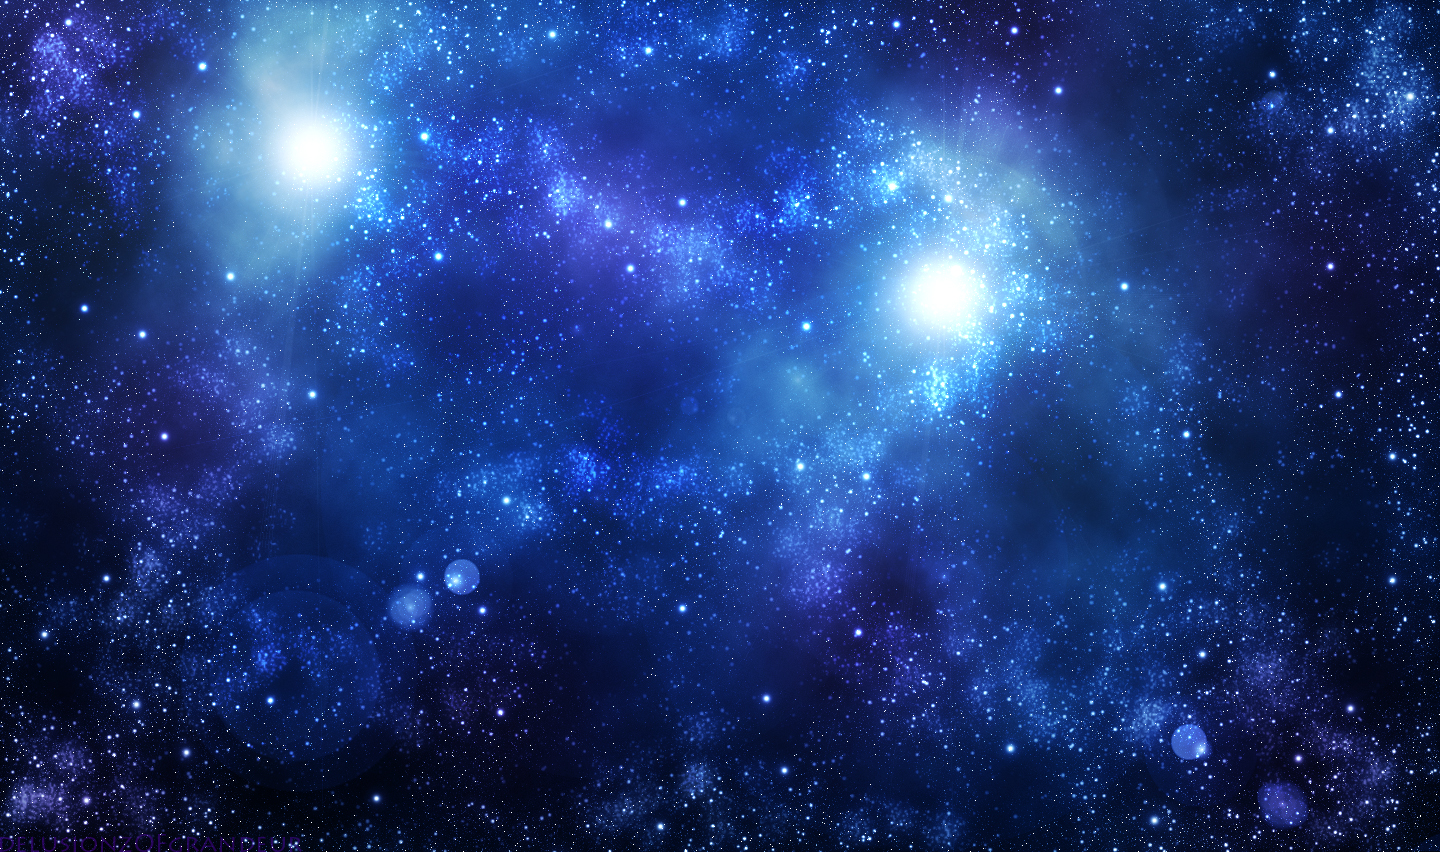 Wallpaper Check Out The Cool Space Galaxy Image High